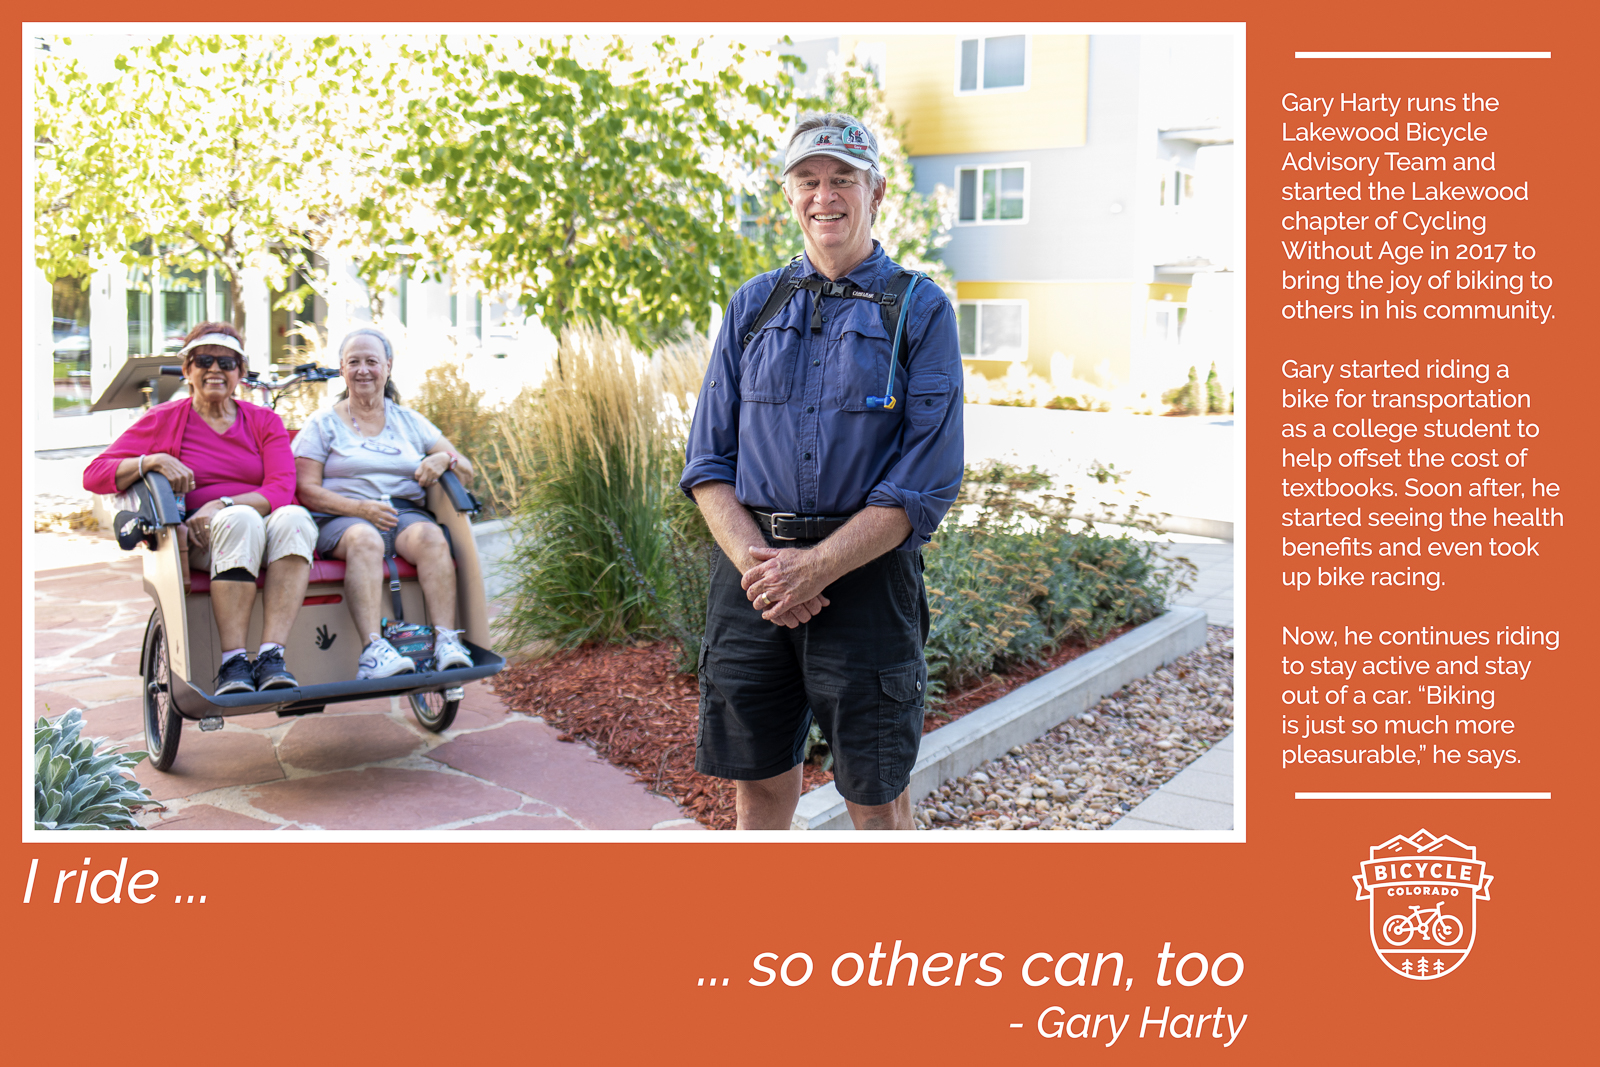 A "why I ride" graphic of Gary Harty, standing with a couple of older adults sitting in the front seat of a trishaw. The text reads "I ride so others can, too. Gary Harty runs the Lakewood Bicycle Advisory Team and started the Lakewood chapter of Cycling Without Age in 2017 to bring the joy of biking to others in his community. Gary started riding a bike for transportation as a college student to help offset the cost of textbooks. Soon after, he started seeing the health benefits and even took up bike racing. Now, he continues riding to stay active and stay out of a car. "Biking is just so much more pleasurable," he says."